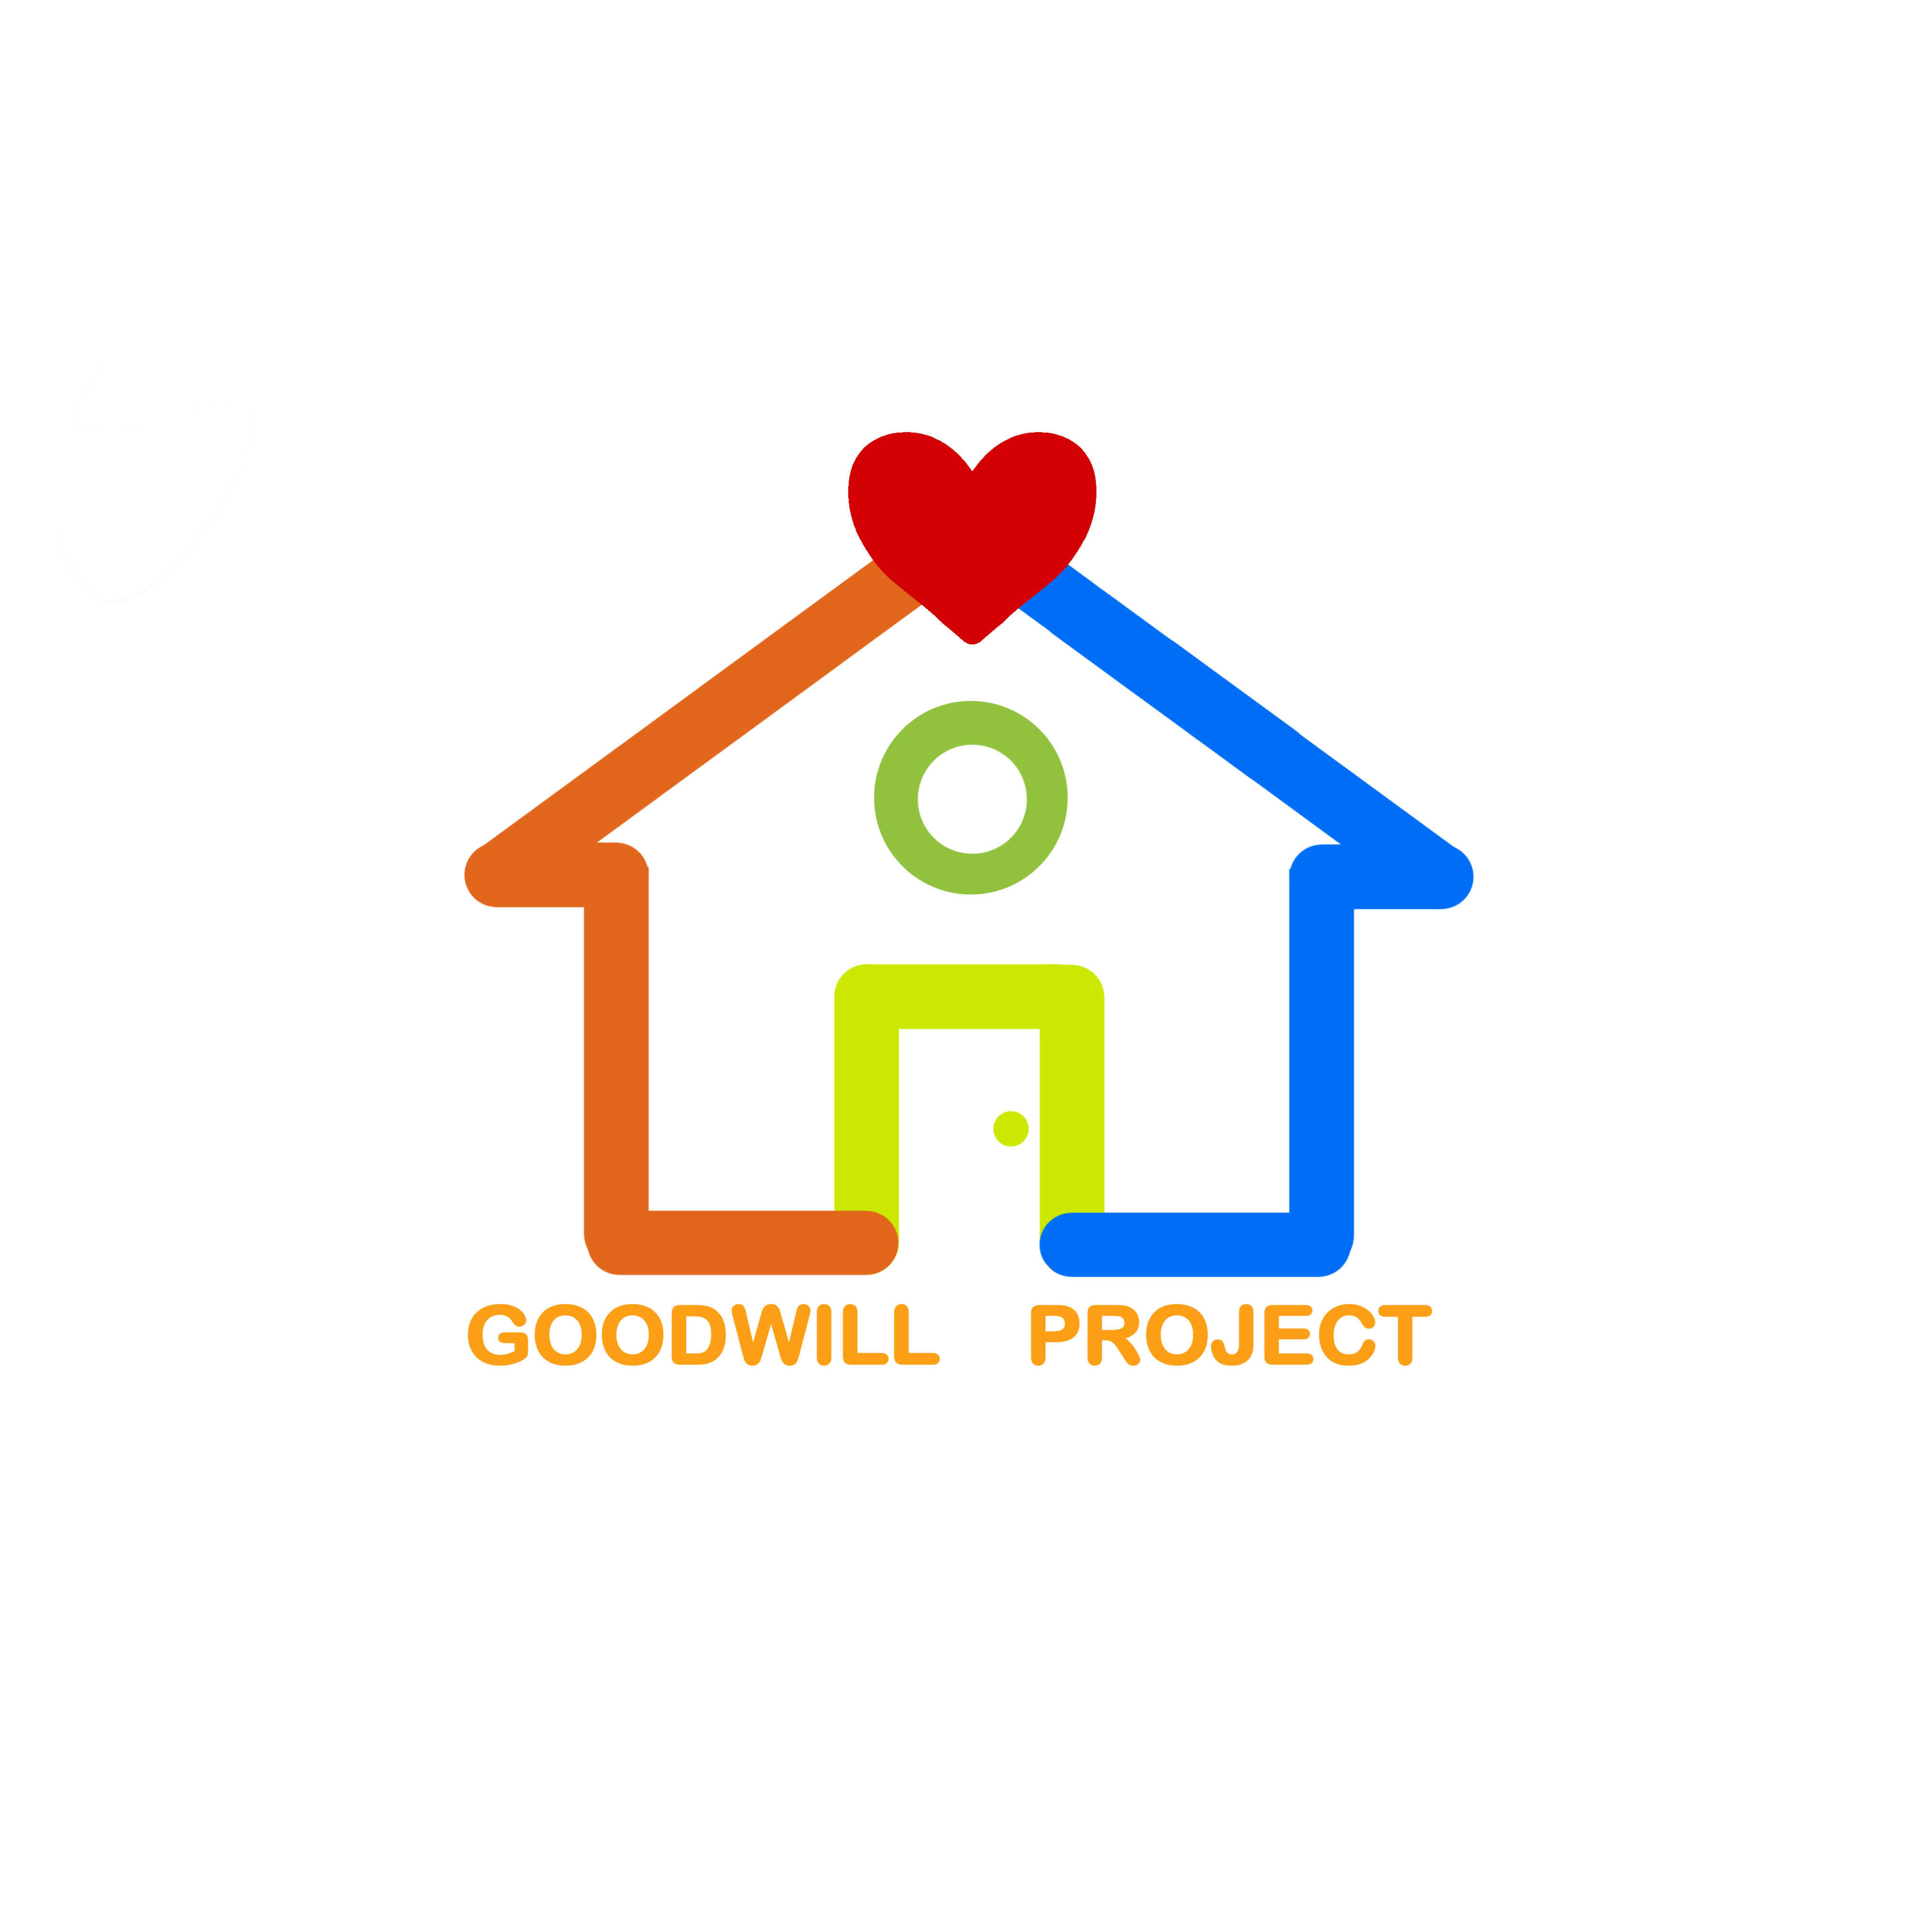 The Goodwill Project